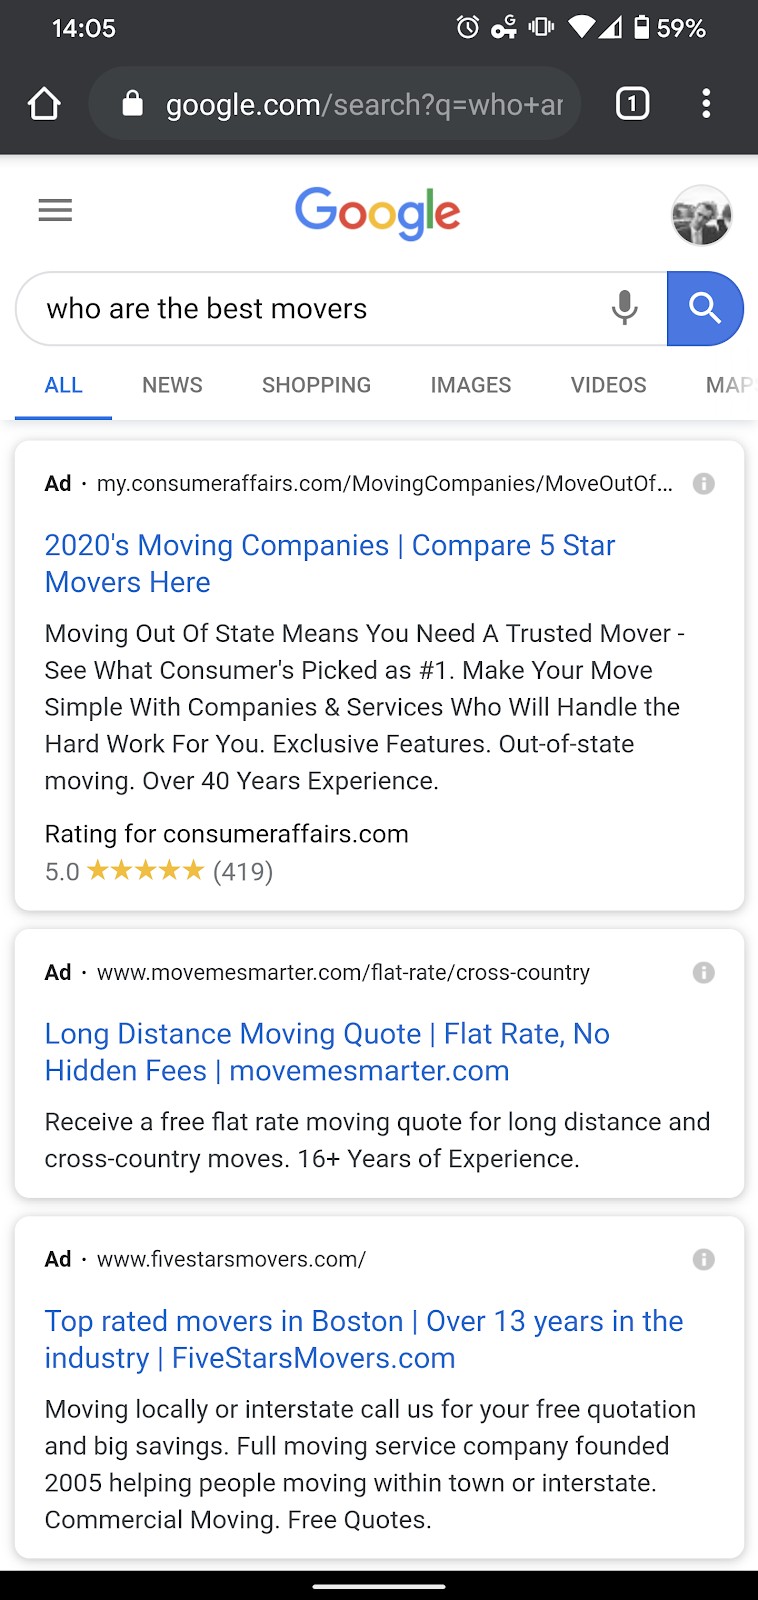 Paid search advertising example.